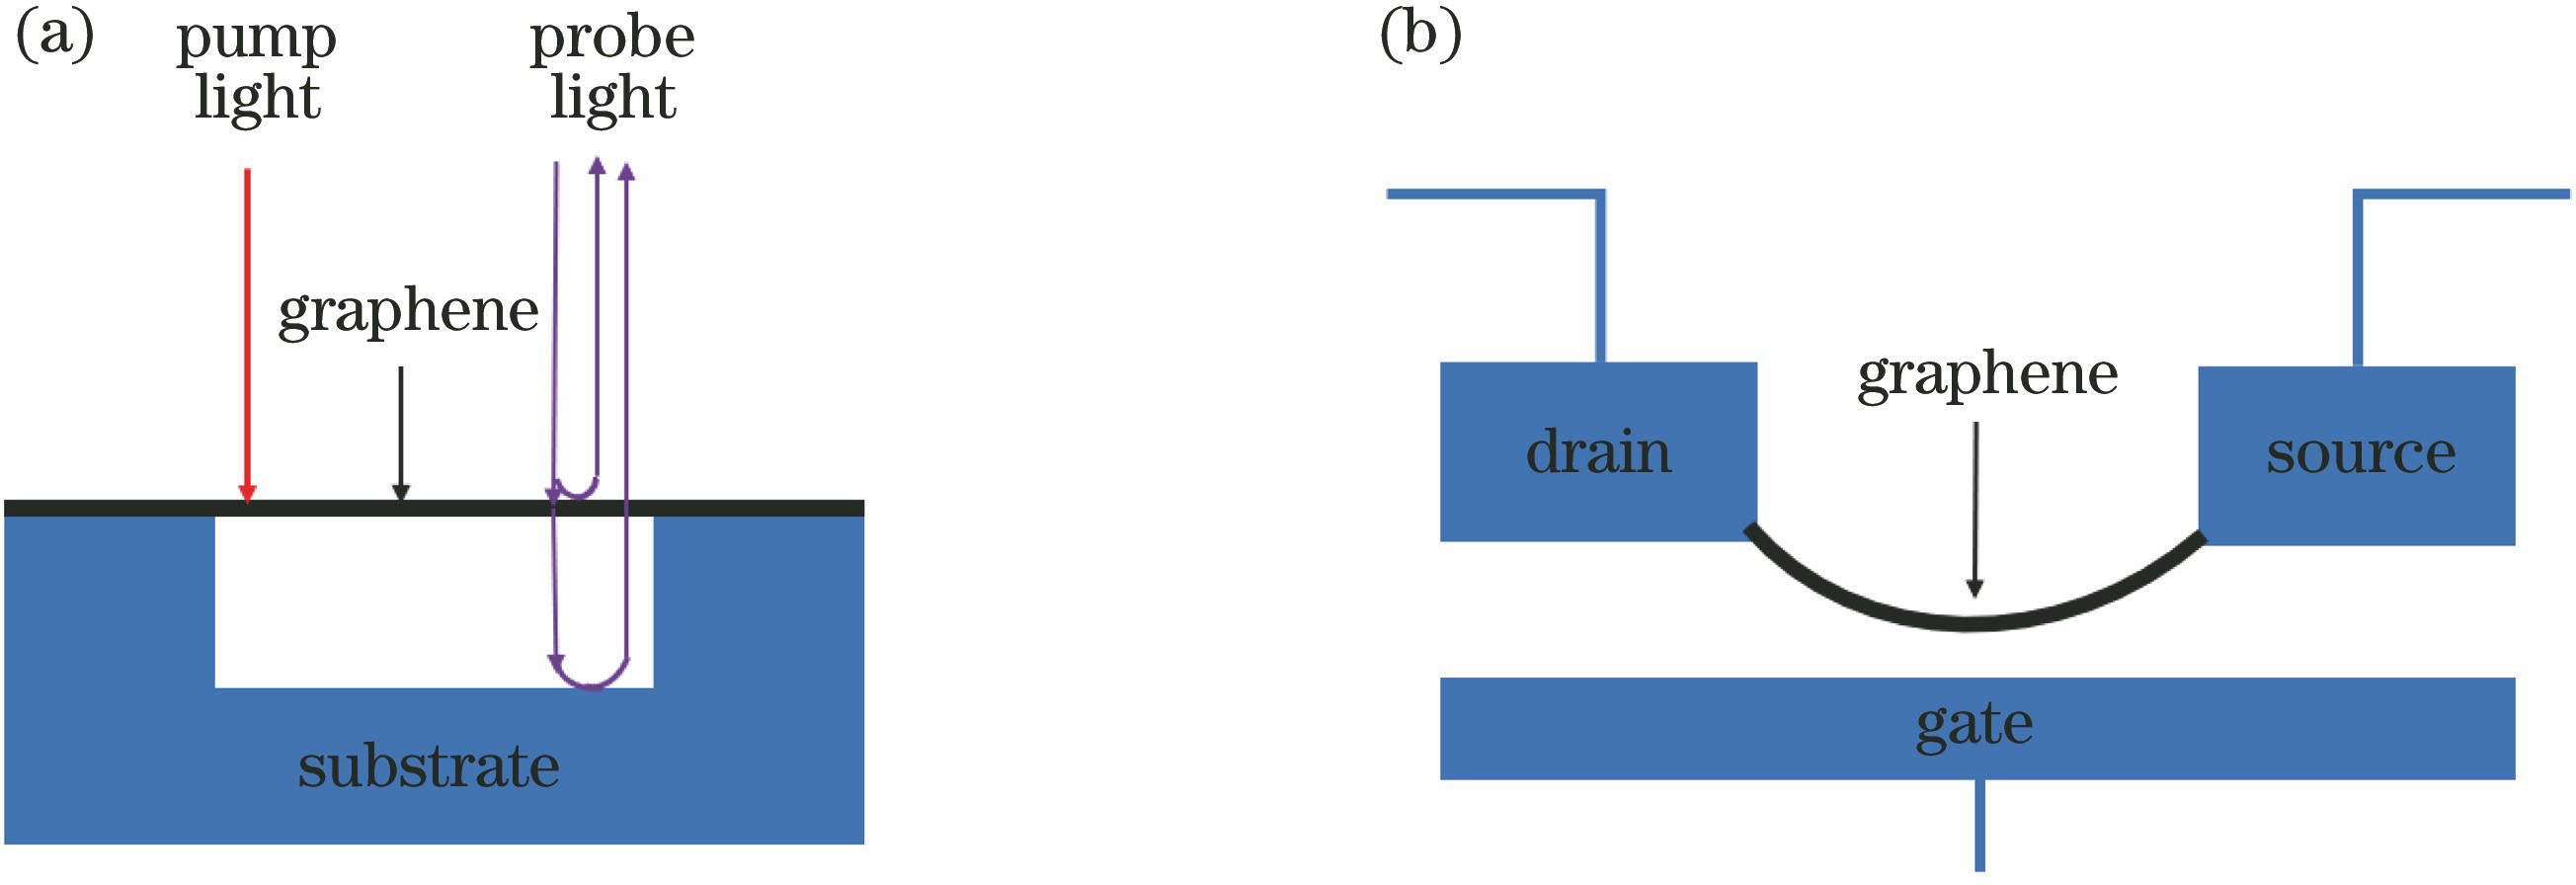 Schematic of graphene nanoelectromechanical system. (a) Optical excitation and optical detection; (b) electrical excitation and electrical detection